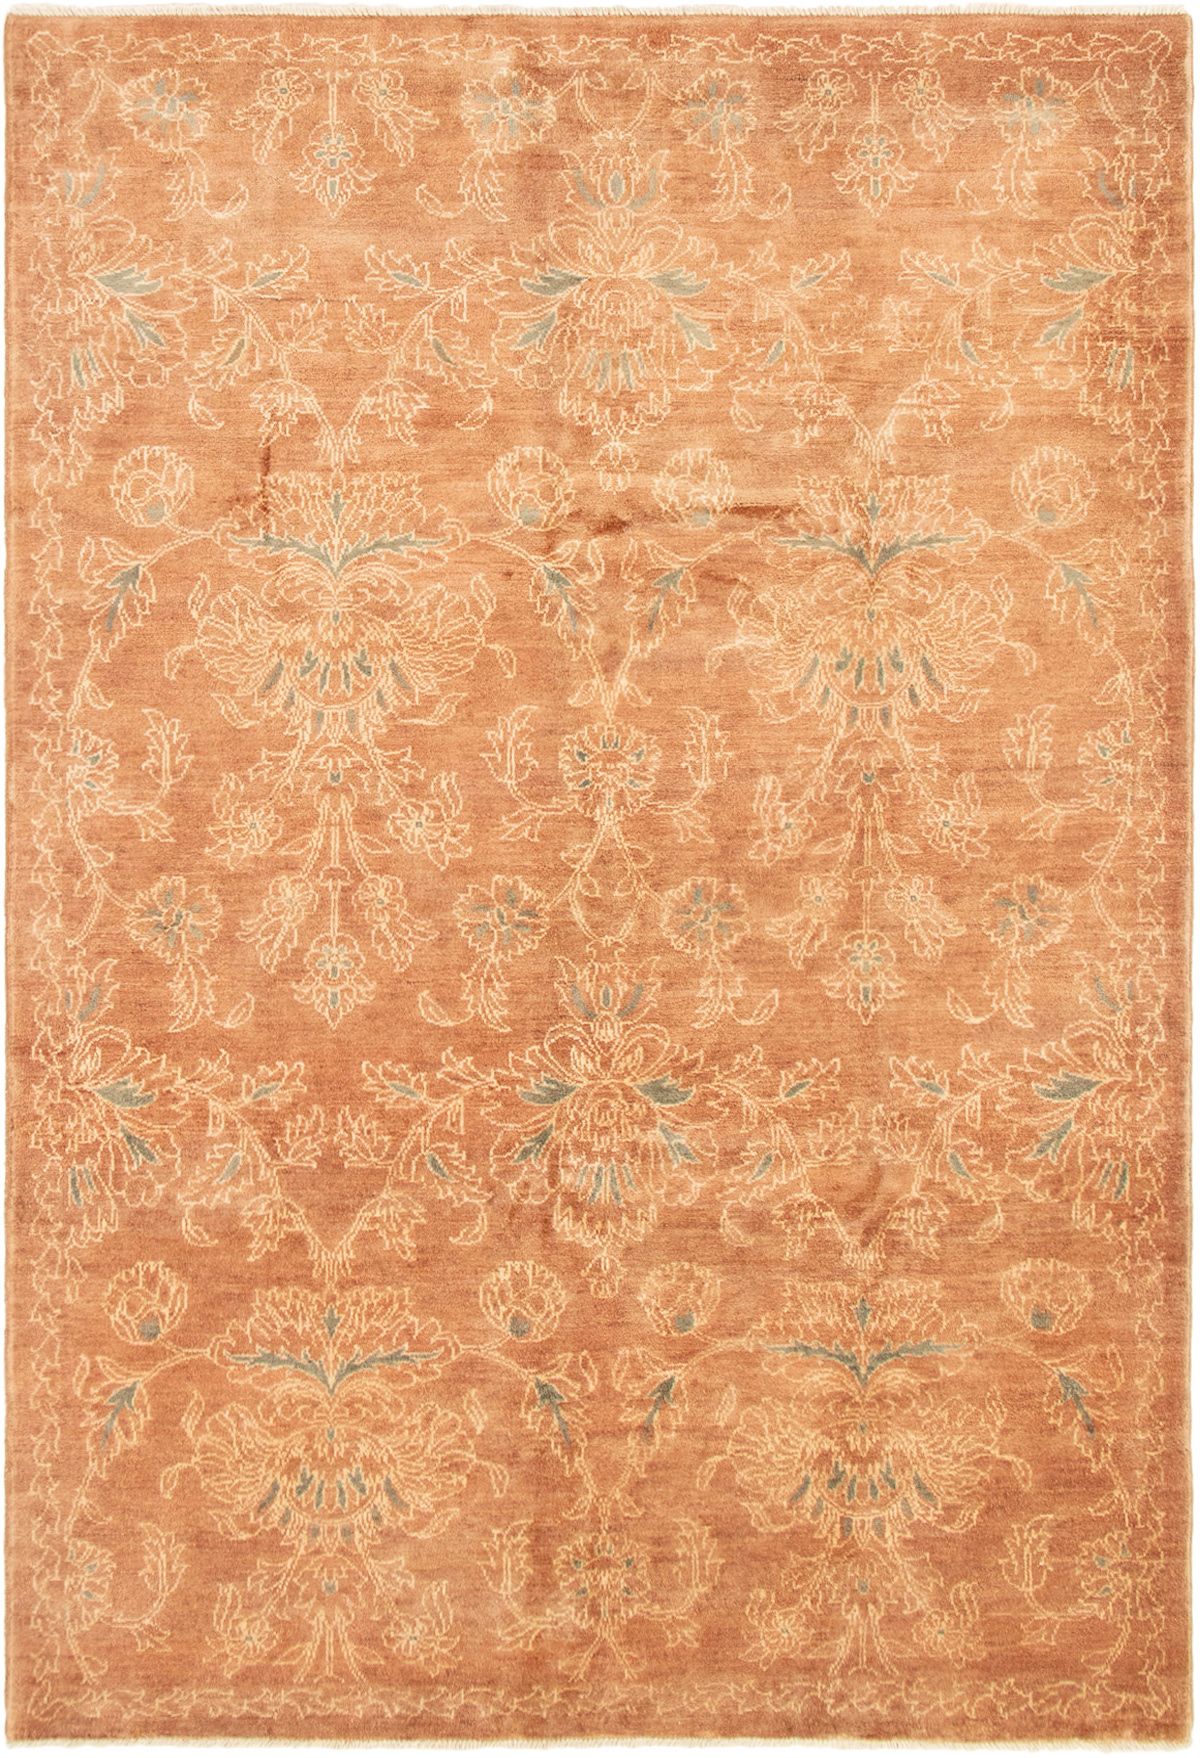 Hand-knotted Finest Ziegler Chobi Brown Wool Rug 5'6" x 8'1" Size: 5'6" x 8'1"  